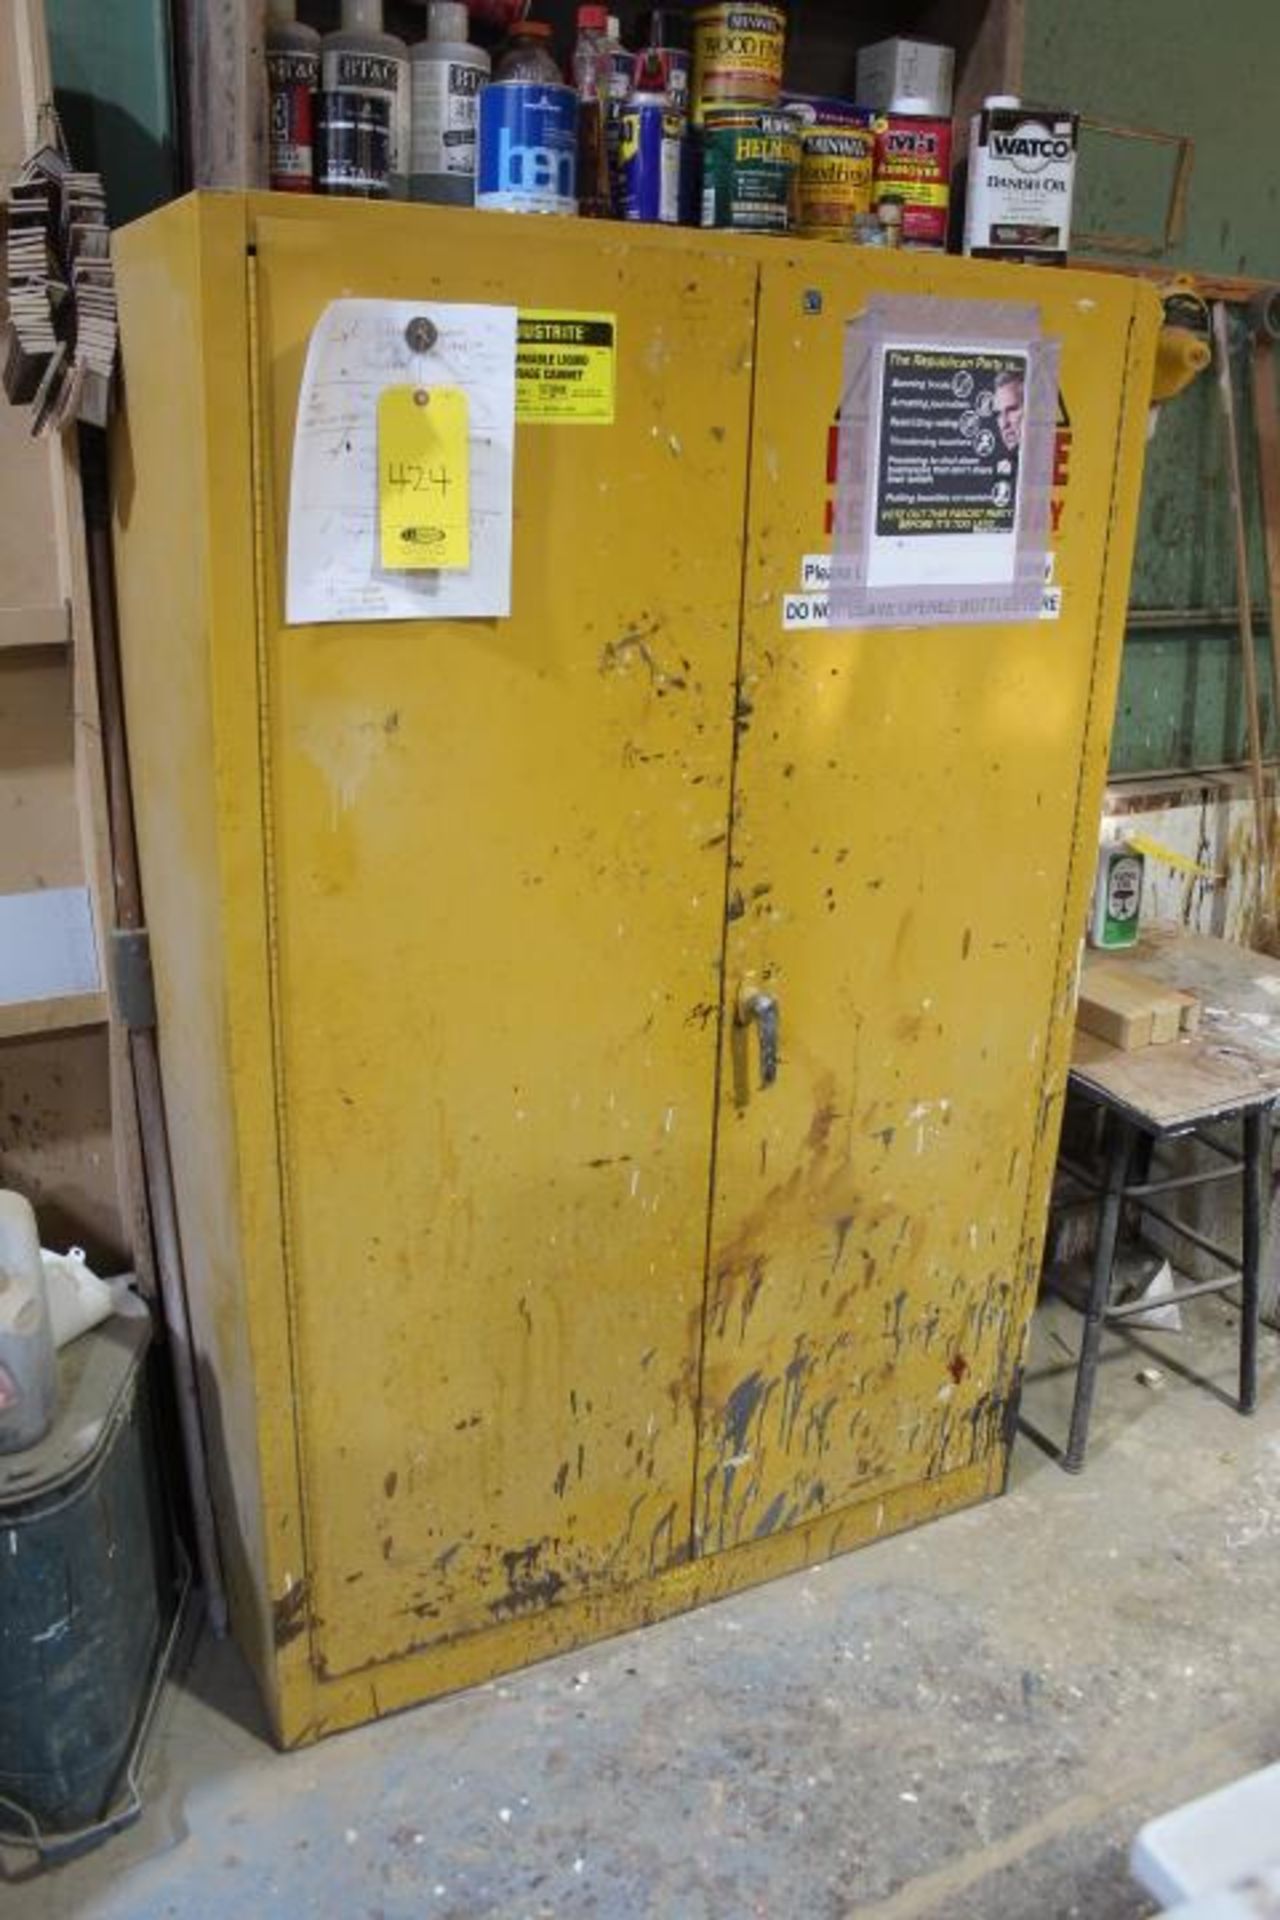 JUSTRITE 45 GALLON FLAMMABLE PROOF CABINET WITH CONTENTS